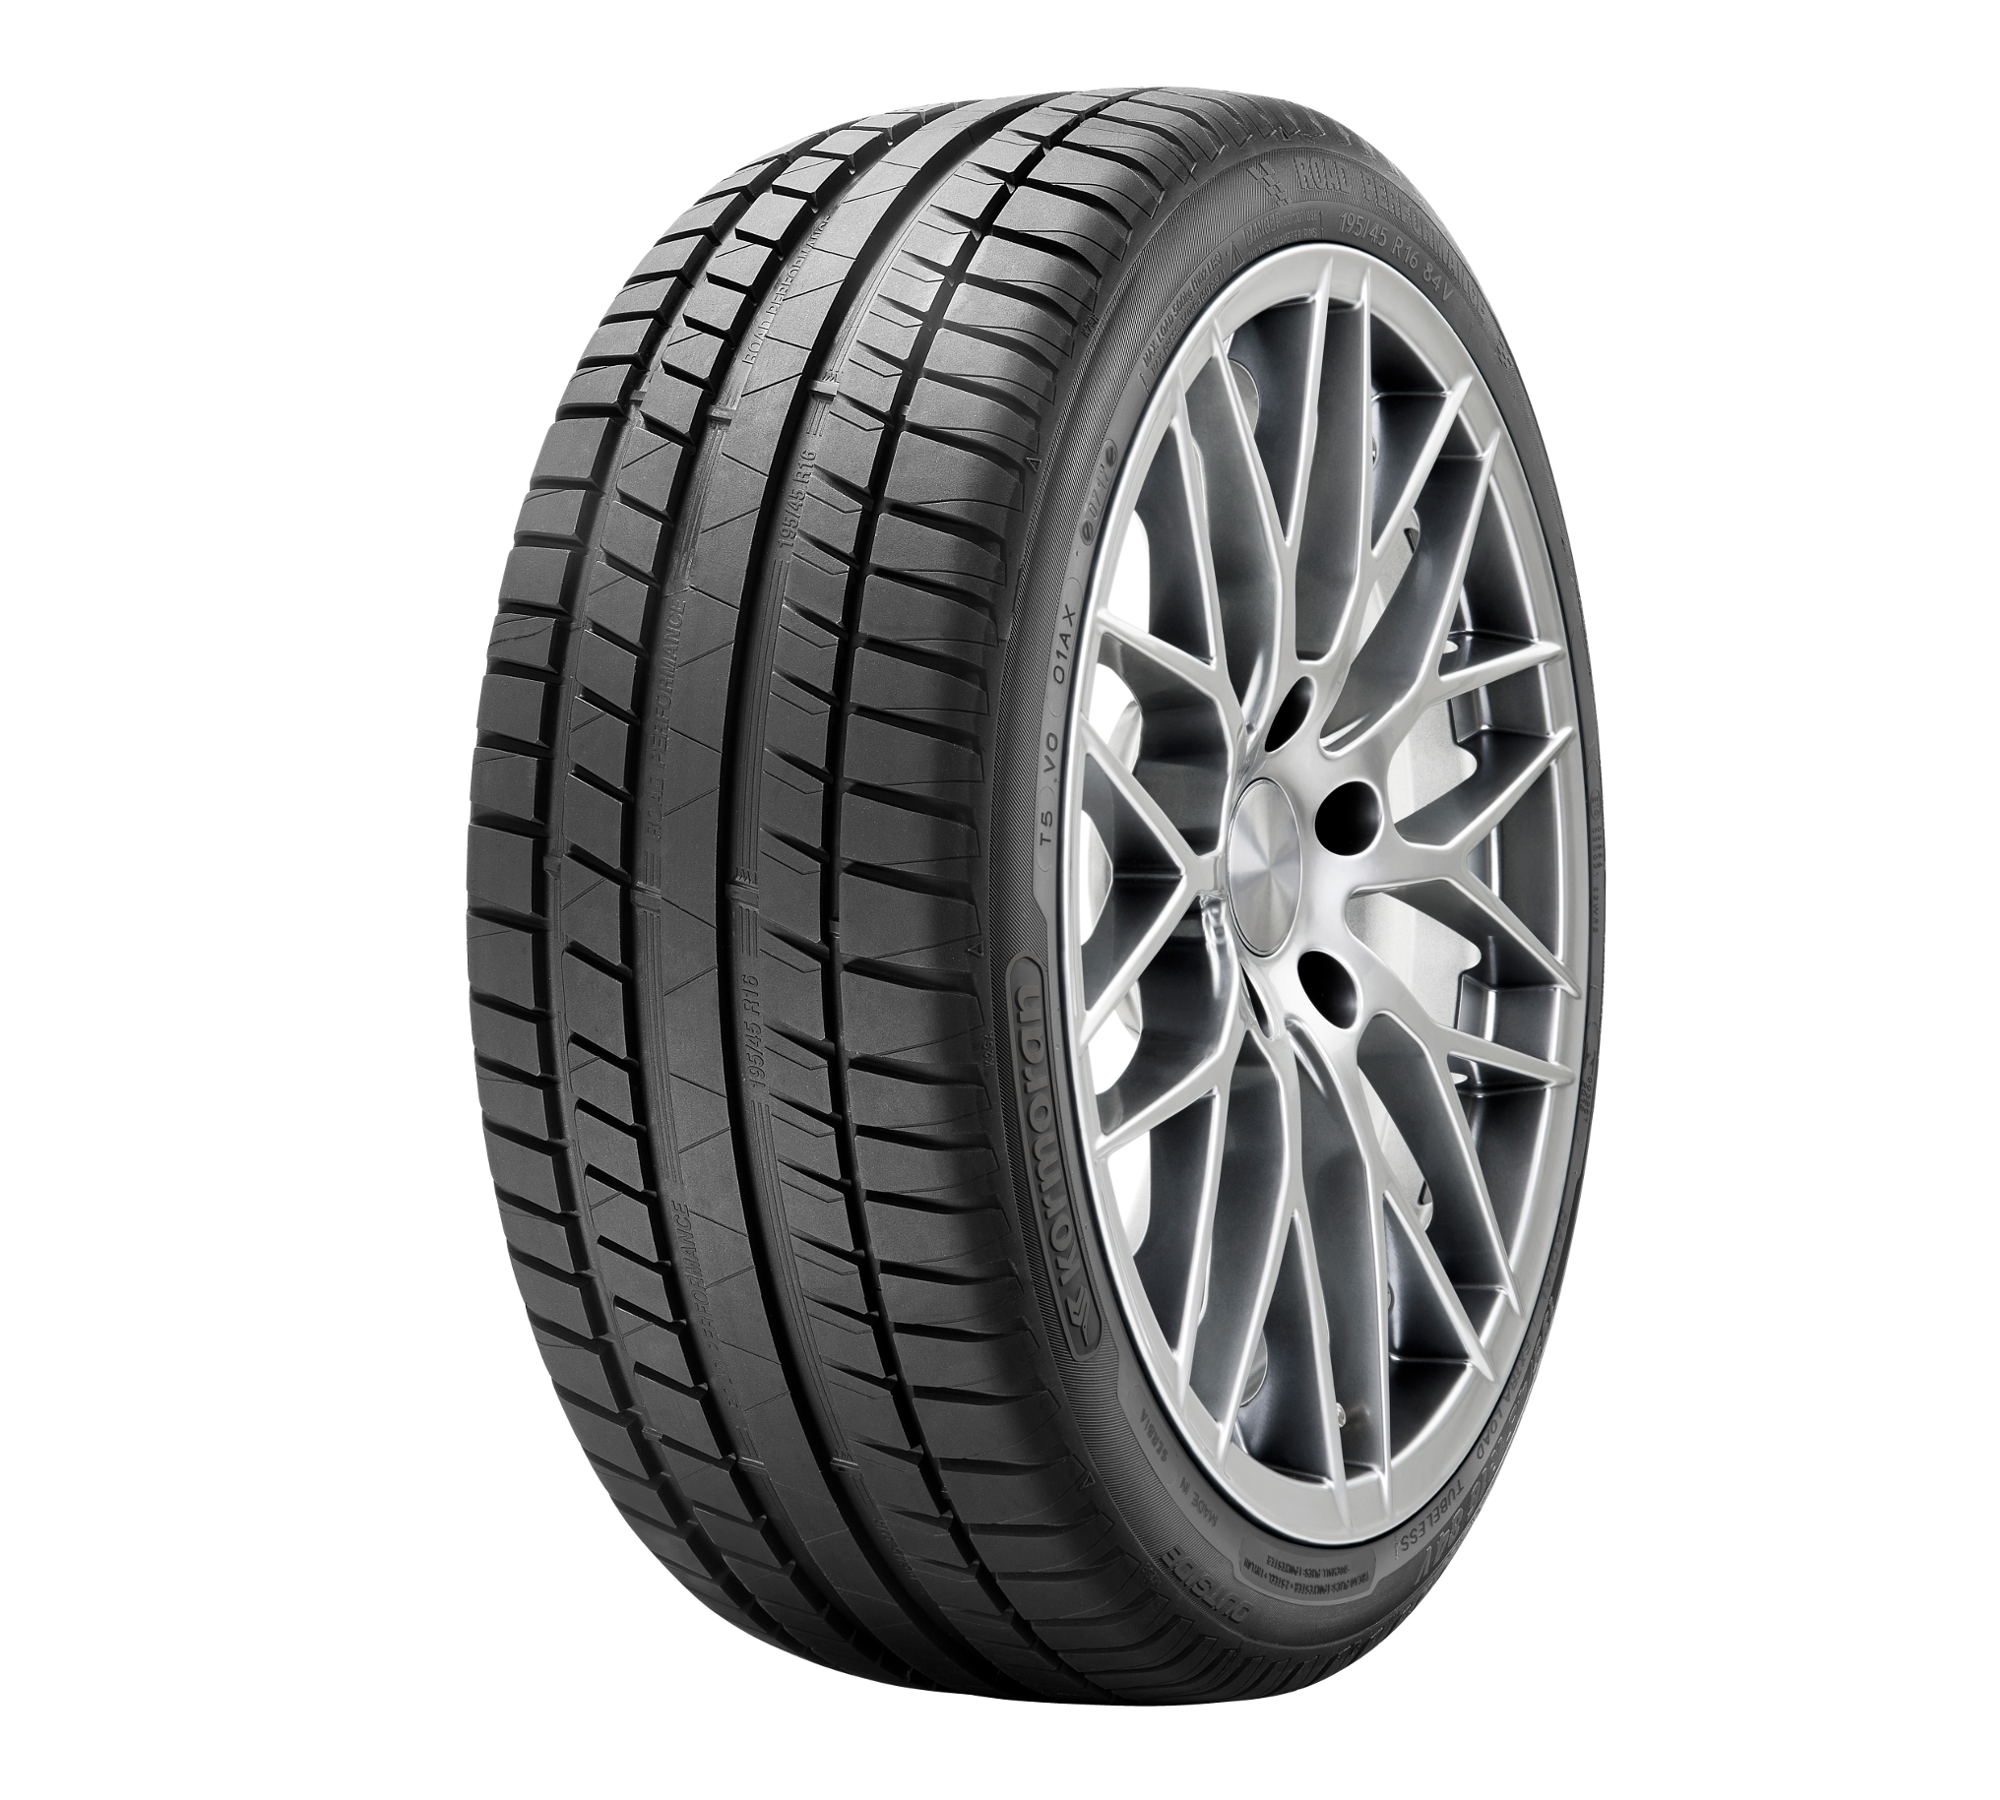 Kormoran - New and Used Tyres online